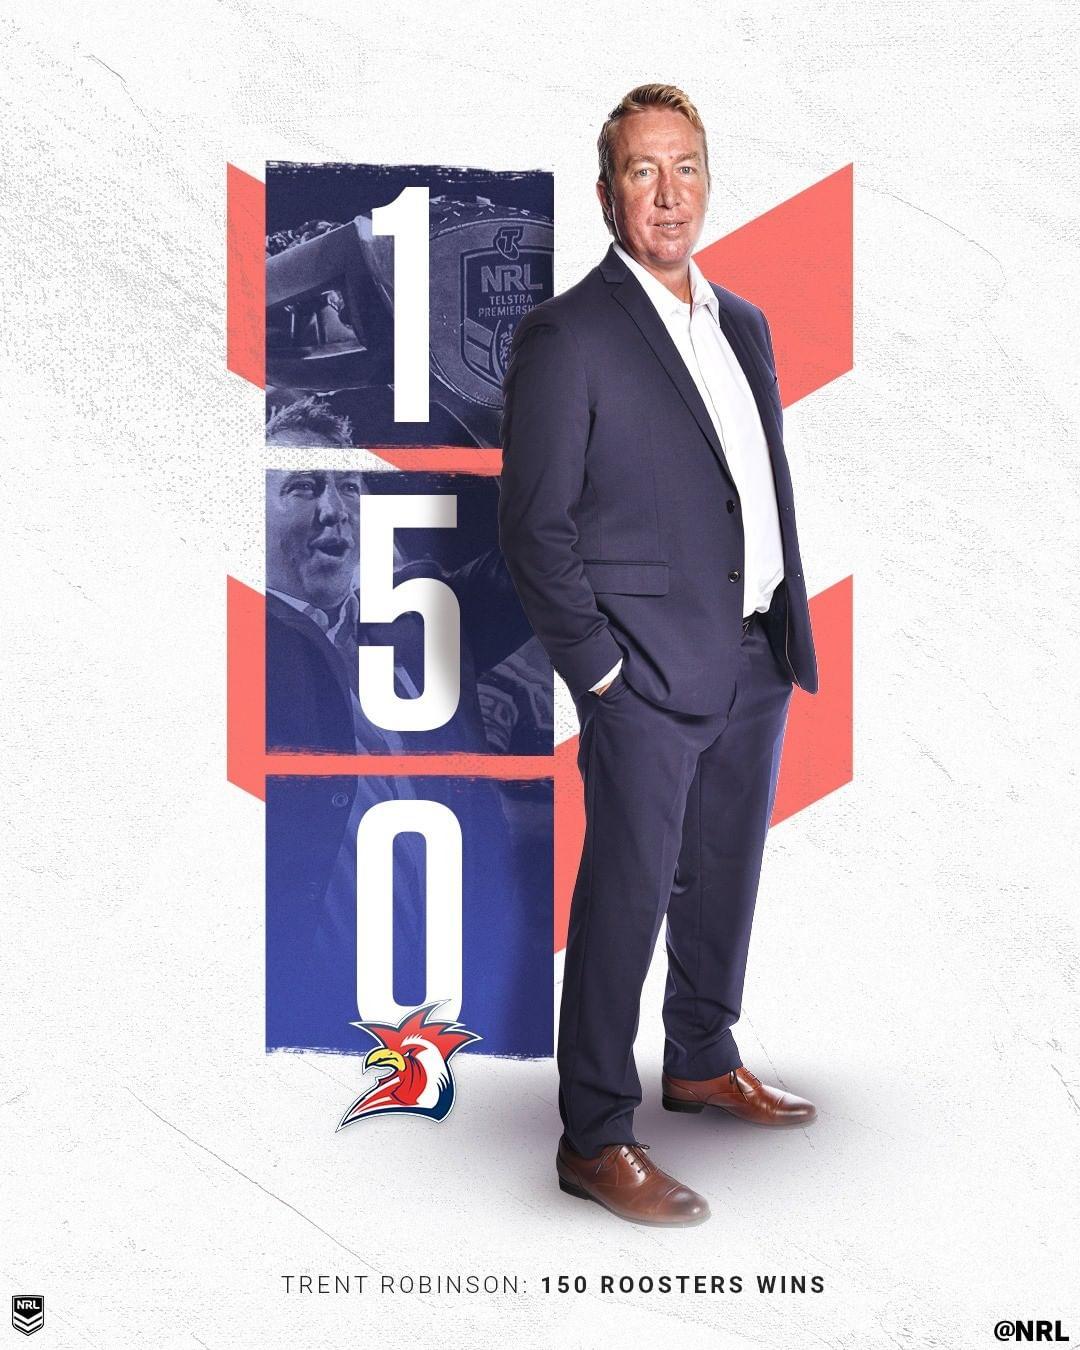 Trent Robinson - the first coach to reach 150 wins for the @sydneyroosters! 👏🐓